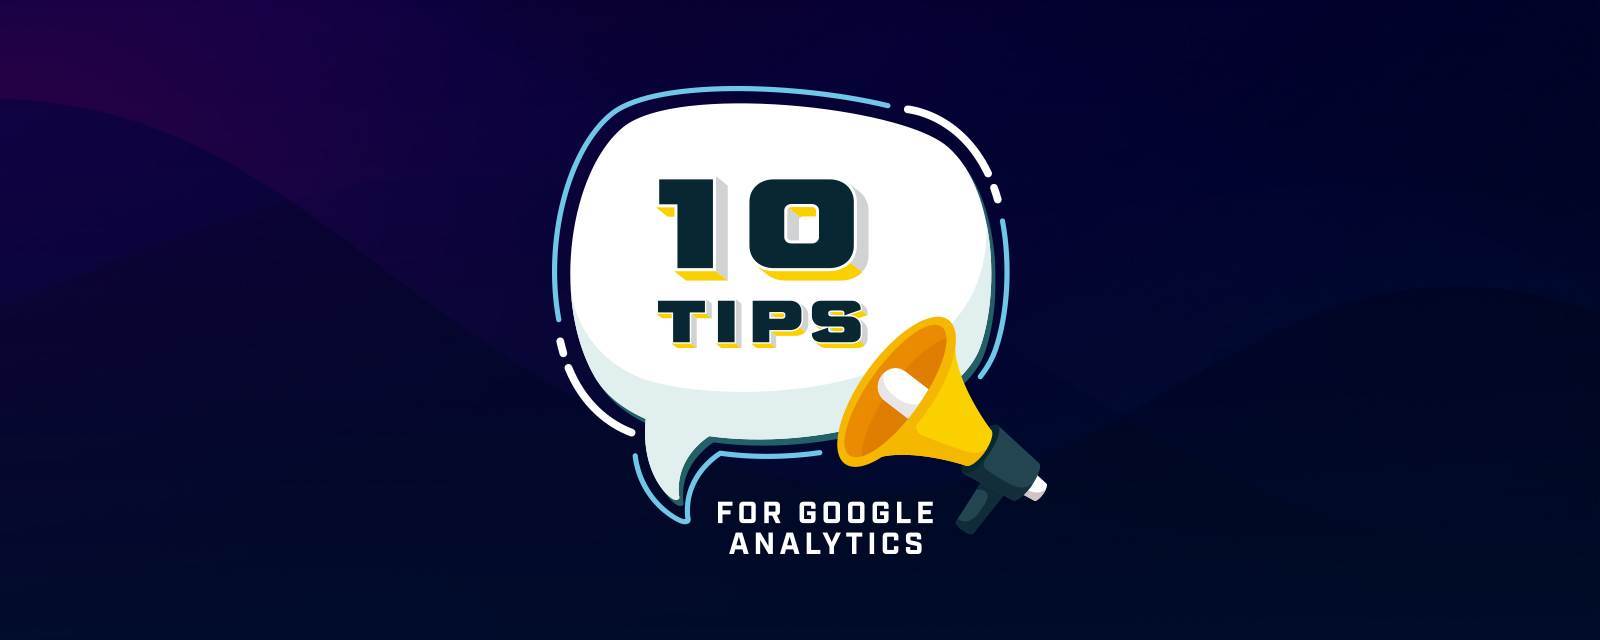 Read more about 10 Tips to Make Google Analytics Your Secret Weapon  blog post